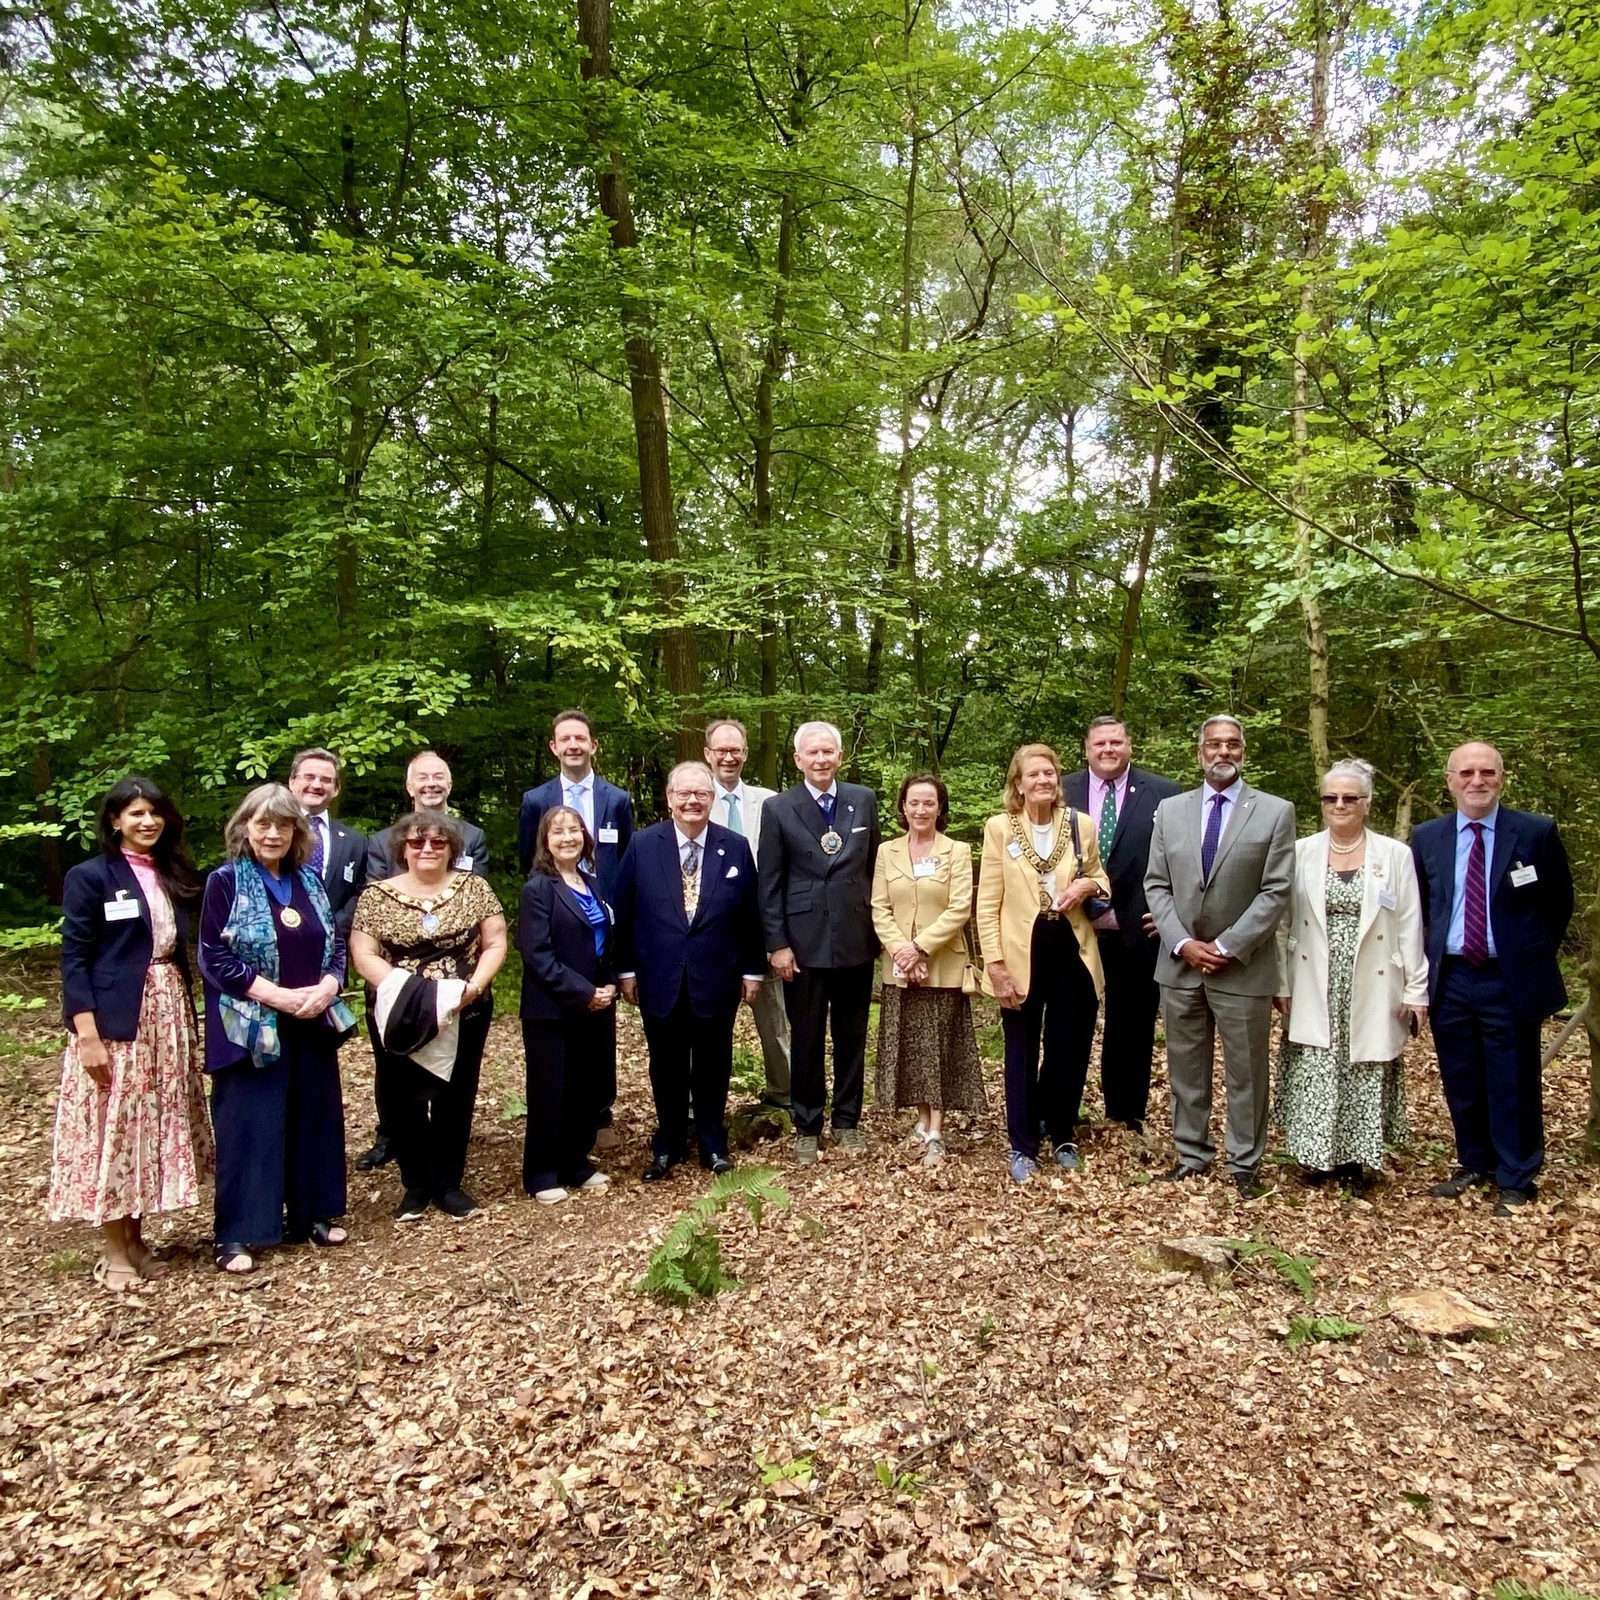 19 July 2023 - Great to visit the City’s Burnham Beeches and see the Lord Mayor exert his privilege to pollard a tree…followed by lunch at the splendid Dorneywood.